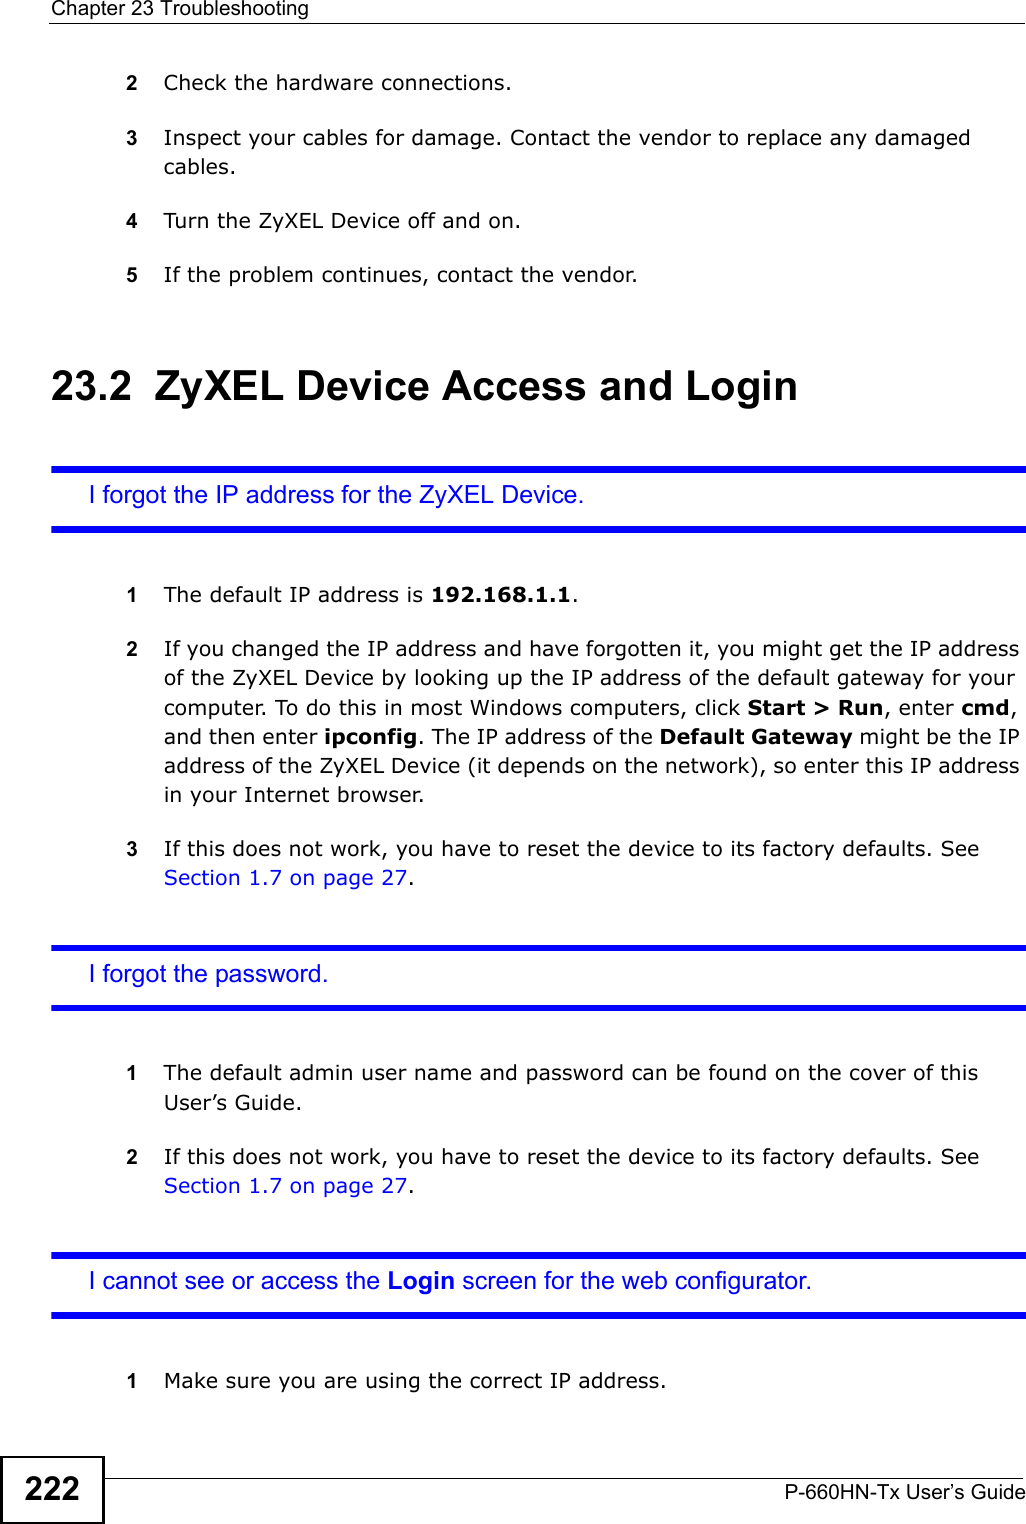 Chapter 23 TroubleshootingP-660HN-Tx User’s Guide2222Check the hardware connections.3Inspect your cables for damage. Contact the vendor to replace any damaged cables.4Turn the ZyXEL Device off and on.5If the problem continues, contact the vendor.23.2  ZyXEL Device Access and LoginI forgot the IP address for the ZyXEL Device.1The default IP address is 192.168.1.1.2If you changed the IP address and have forgotten it, you might get the IP address of the ZyXEL Device by looking up the IP address of the default gateway for your computer. To do this in most Windows computers, click Start &gt; Run, enter cmd, and then enter ipconfig. The IP address of the Default Gateway might be the IP address of the ZyXEL Device (it depends on the network), so enter this IP address in your Internet browser.3If this does not work, you have to reset the device to its factory defaults. See Section 1.7 on page 27.I forgot the password.1The default admin user name and password can be found on the cover of this User’s Guide.2If this does not work, you have to reset the device to its factory defaults. See Section 1.7 on page 27.I cannot see or access the Login screen for the web configurator.1Make sure you are using the correct IP address.